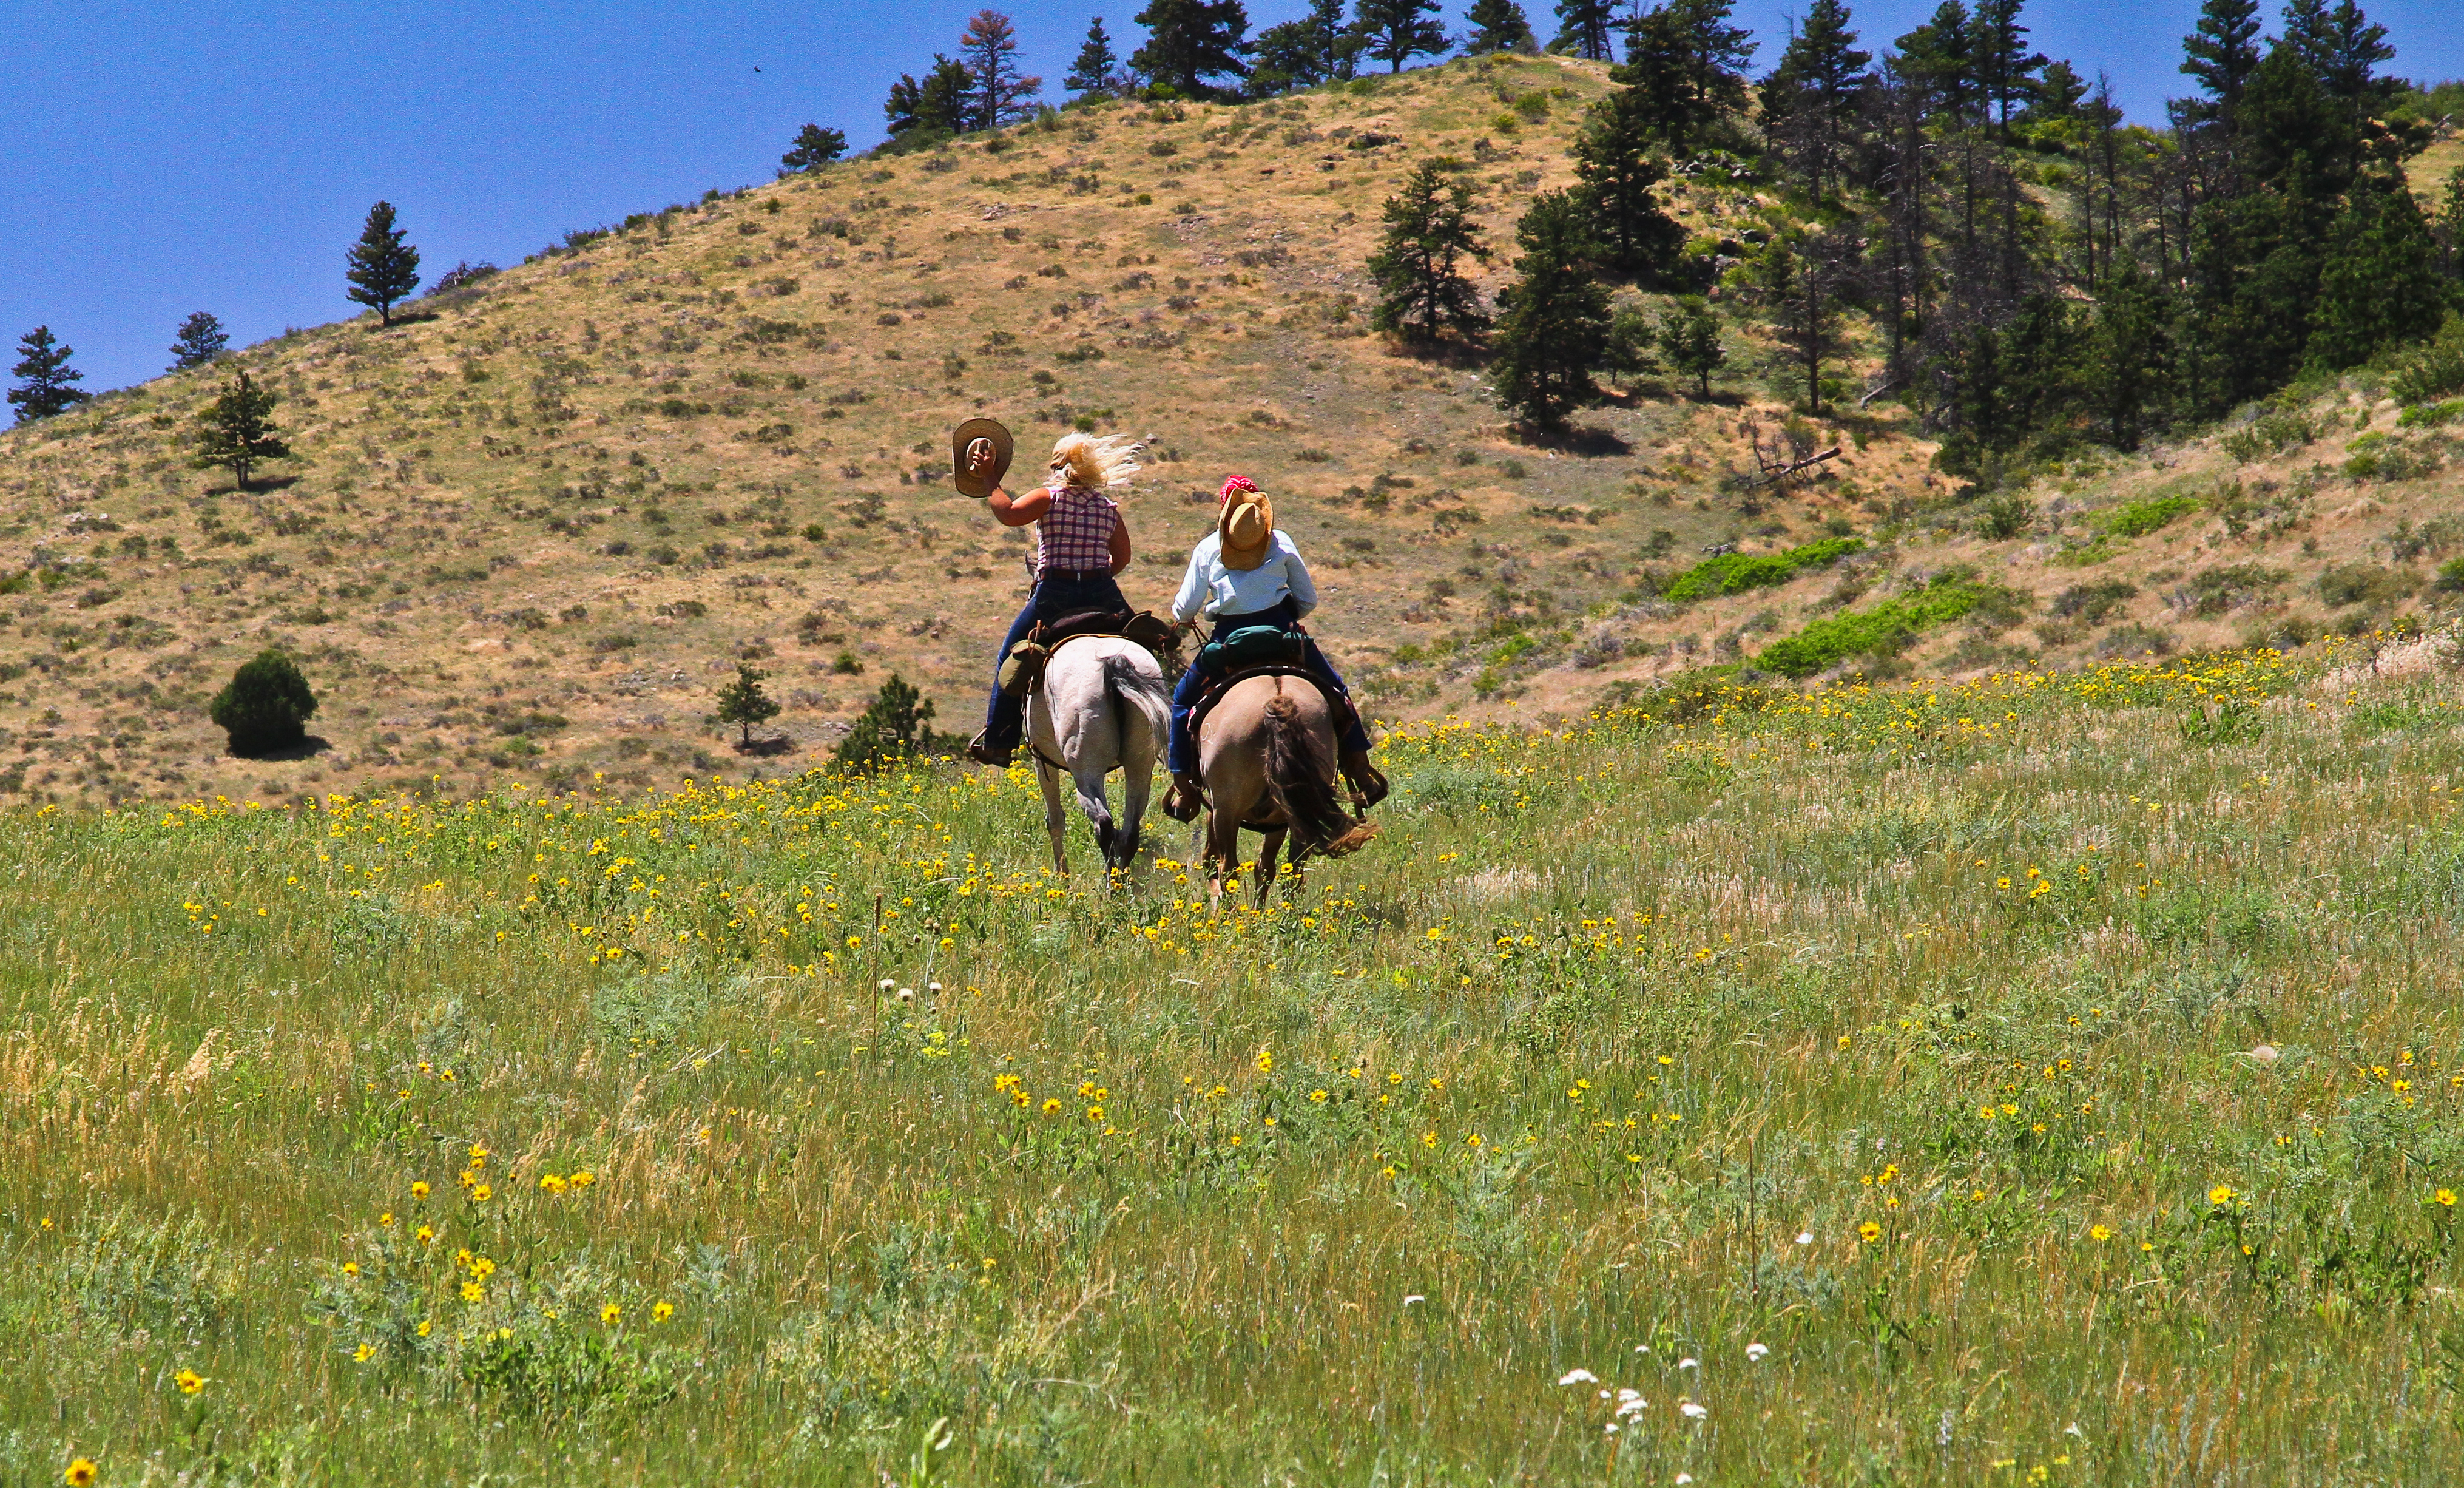 USA Today's 10Best "Best Dude Ranch"